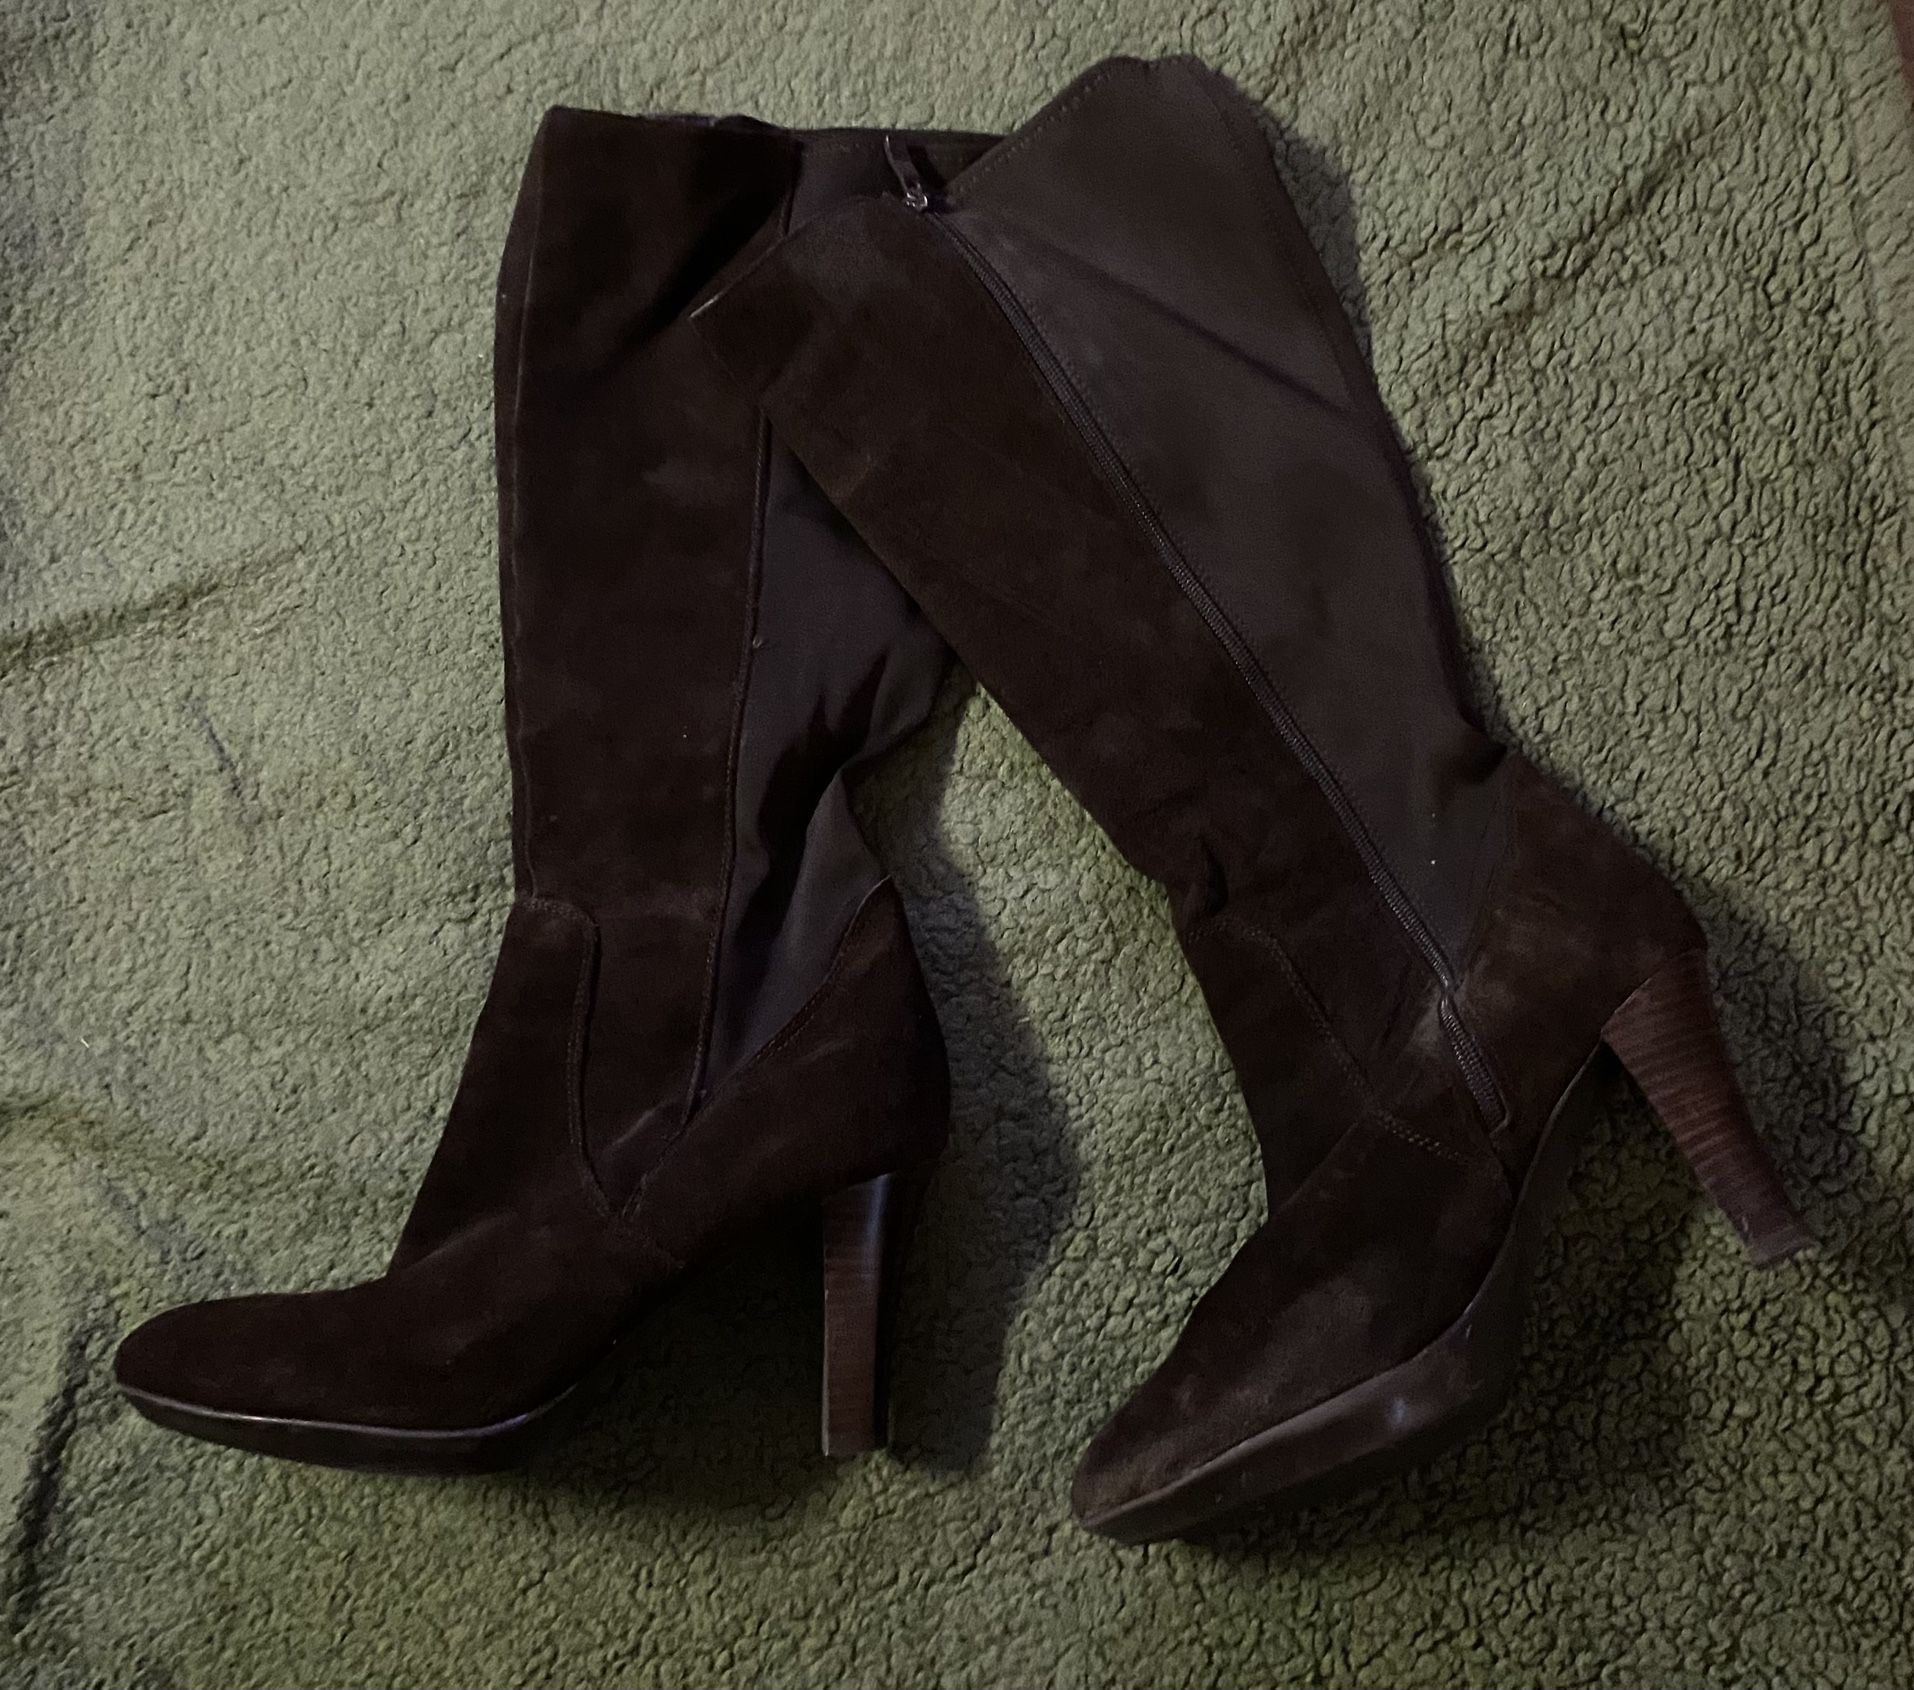 Lane Bryant Brown Suede Heeled Boots